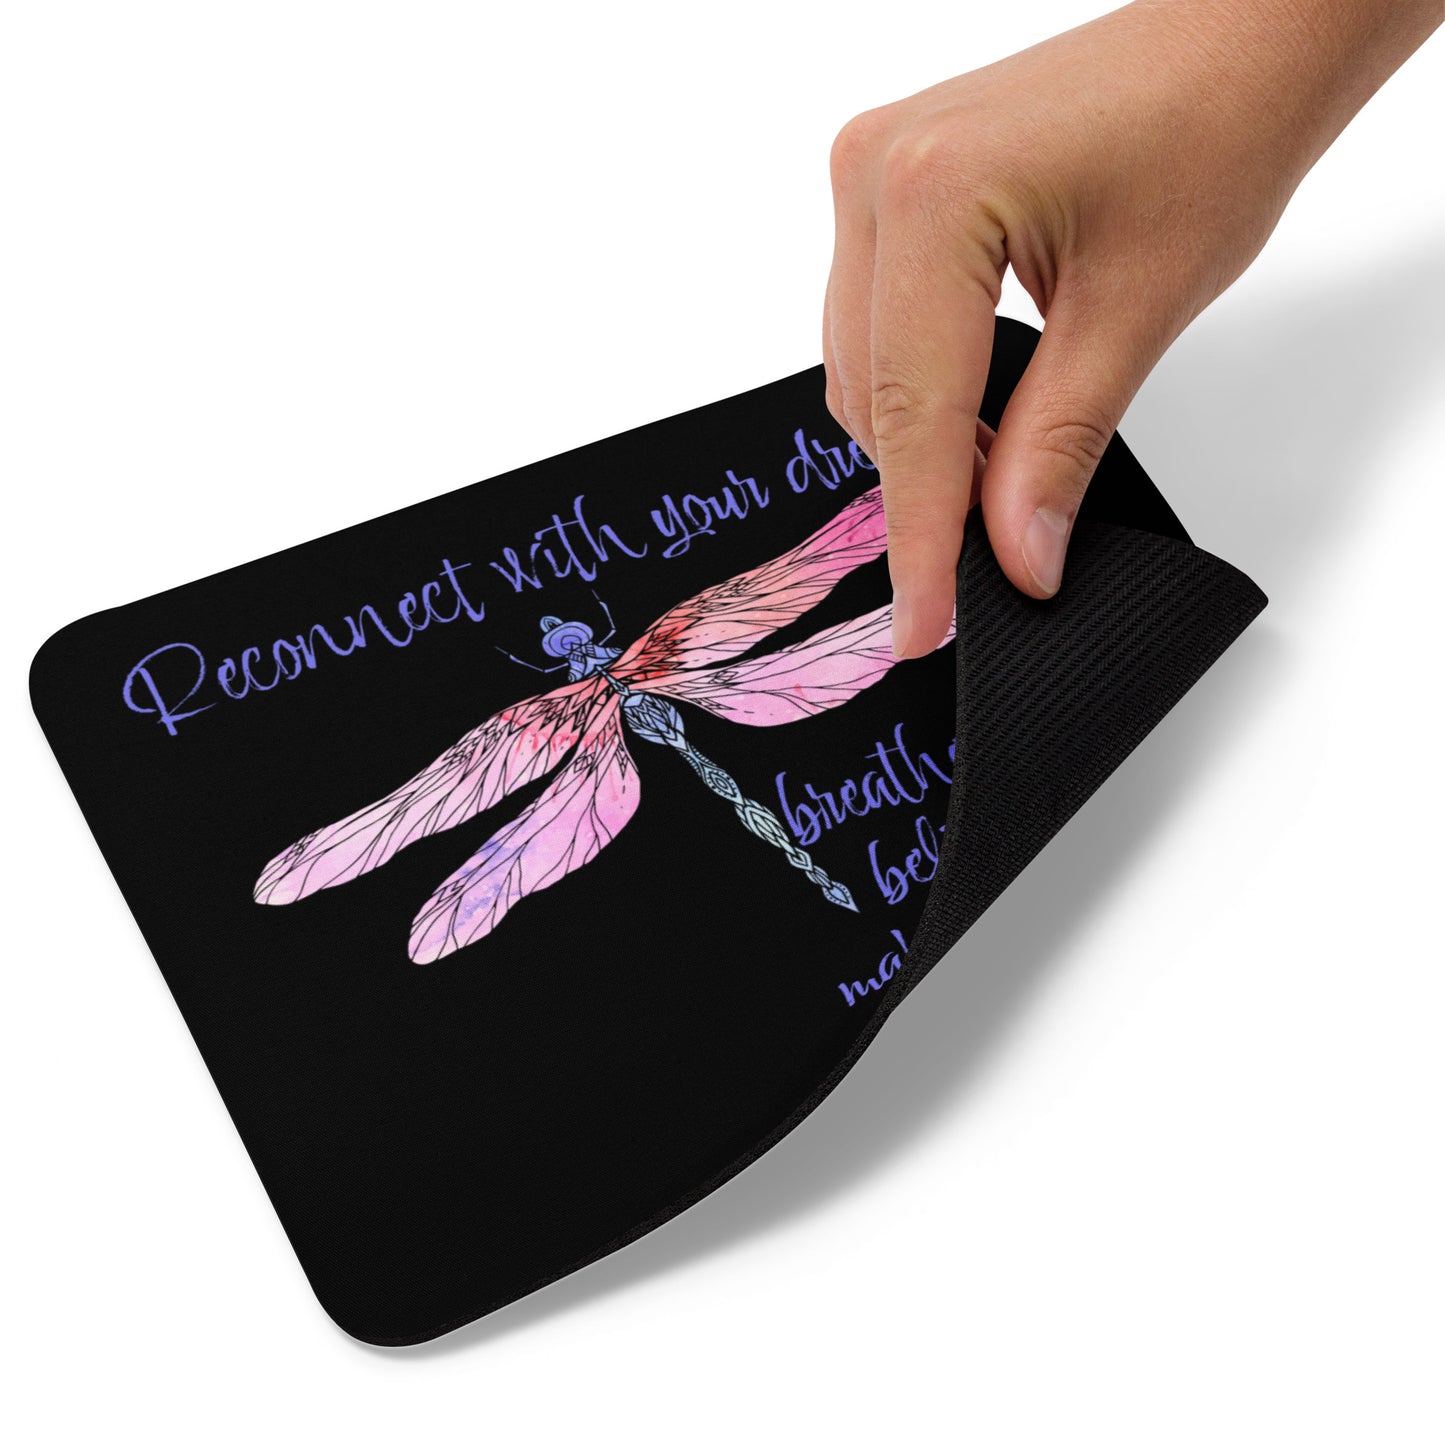 Reconnect With Your Dreams MP313 Mouse pad